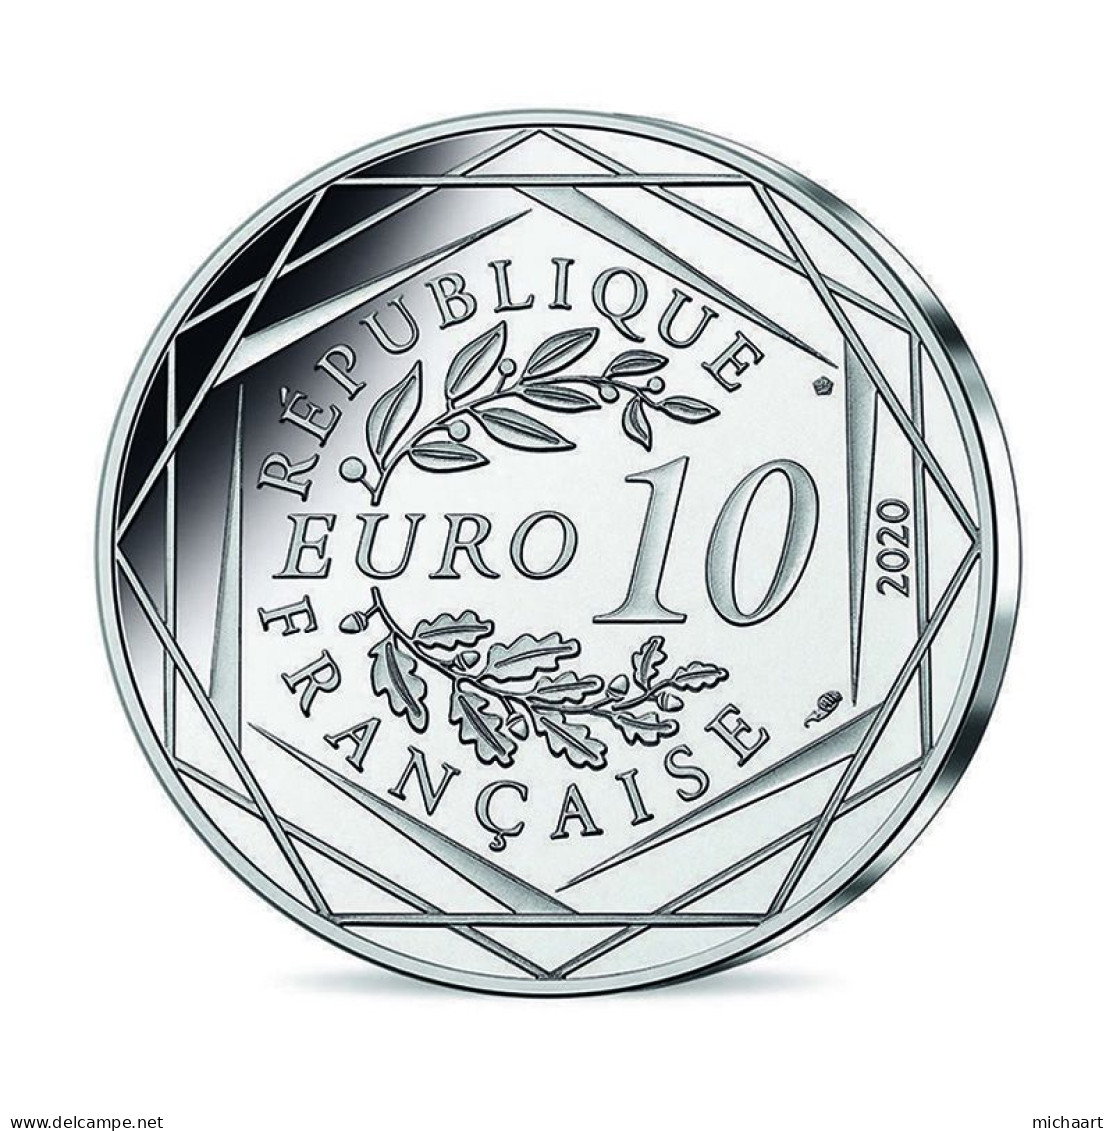 France 10 Euro Silver 2020 Brainy The Smurfs Colored Coin Cartoon 00398 - Commemoratives